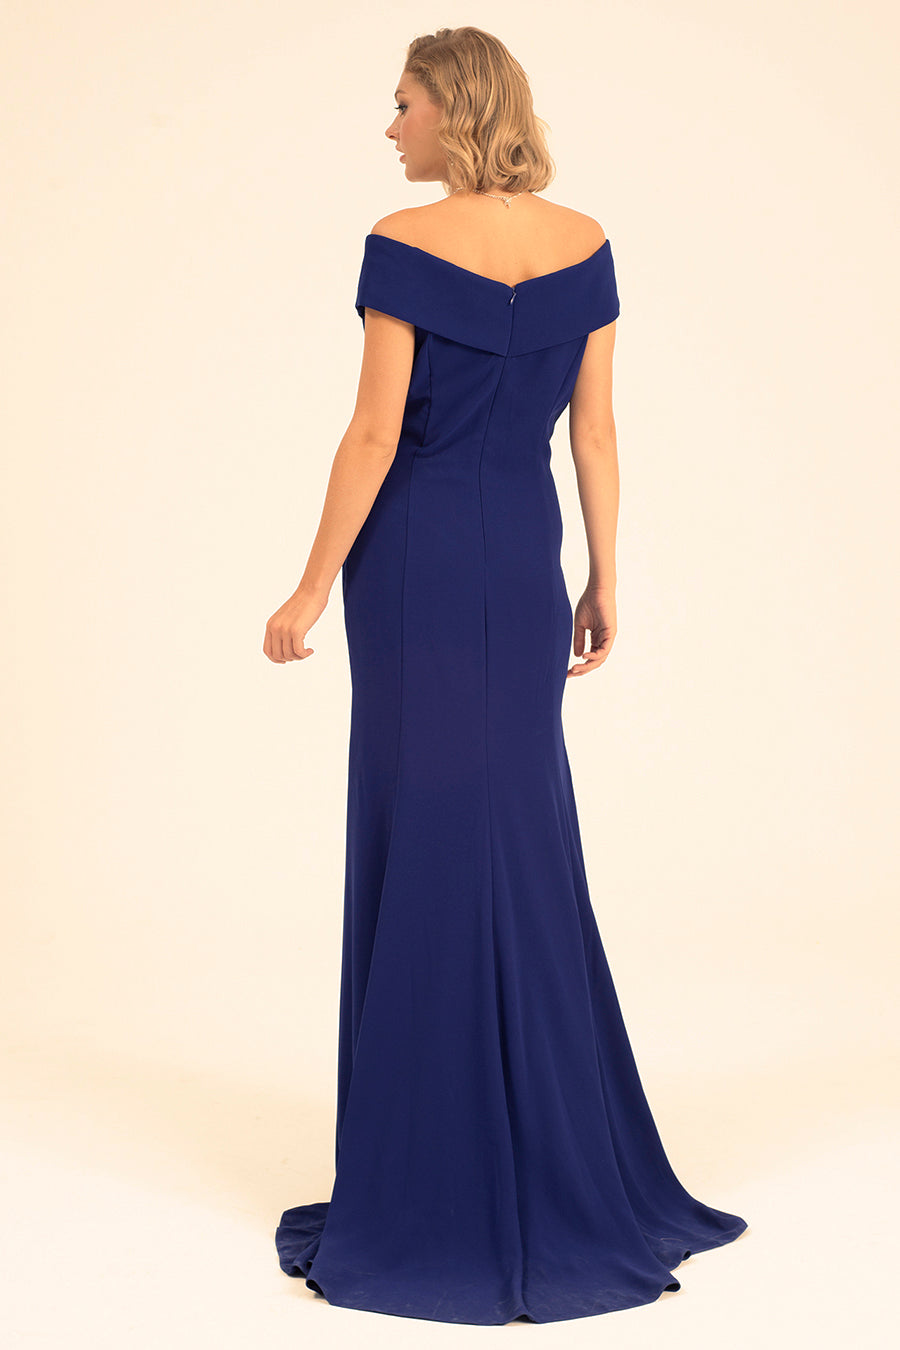 Riley - Mystic Evenings | Evening and Prom Dresses